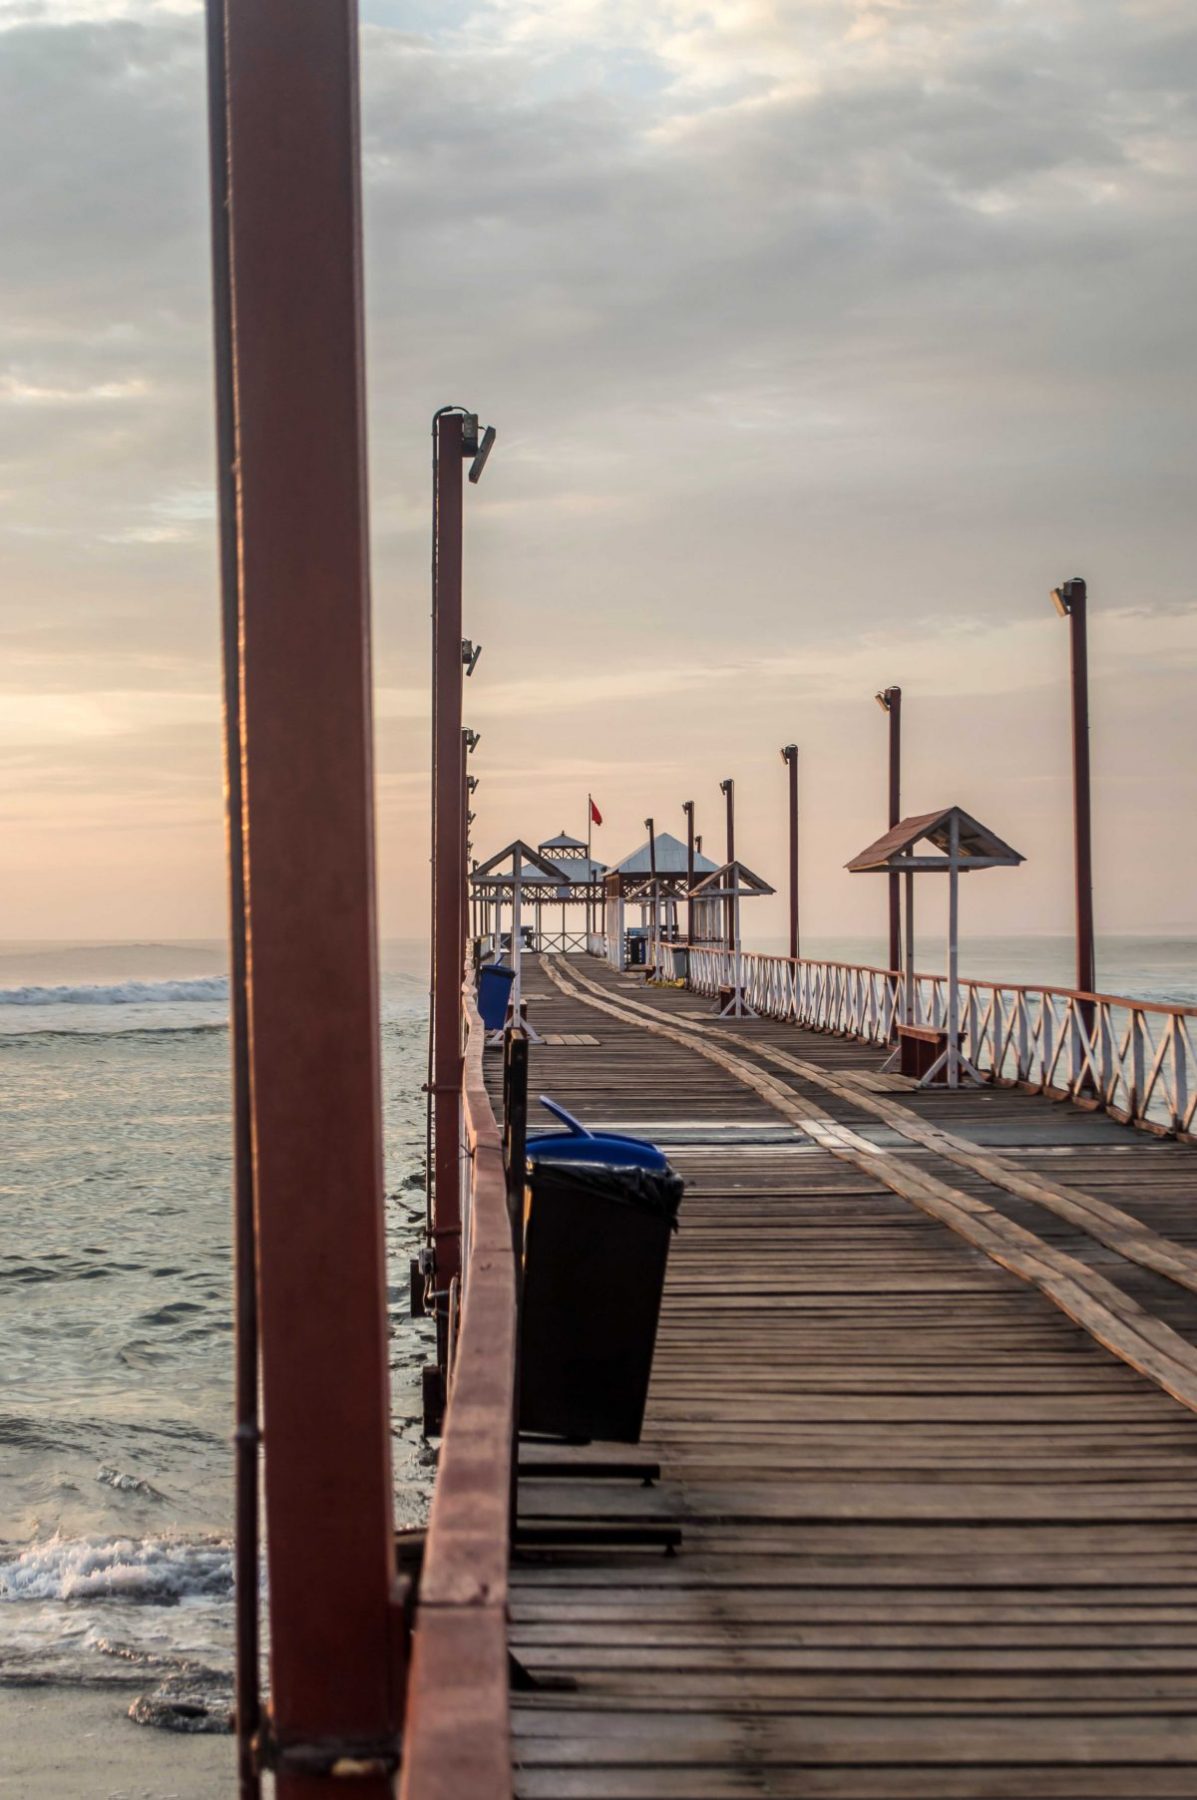 Your Food and Adventure Guide to Huanchaco, Peru